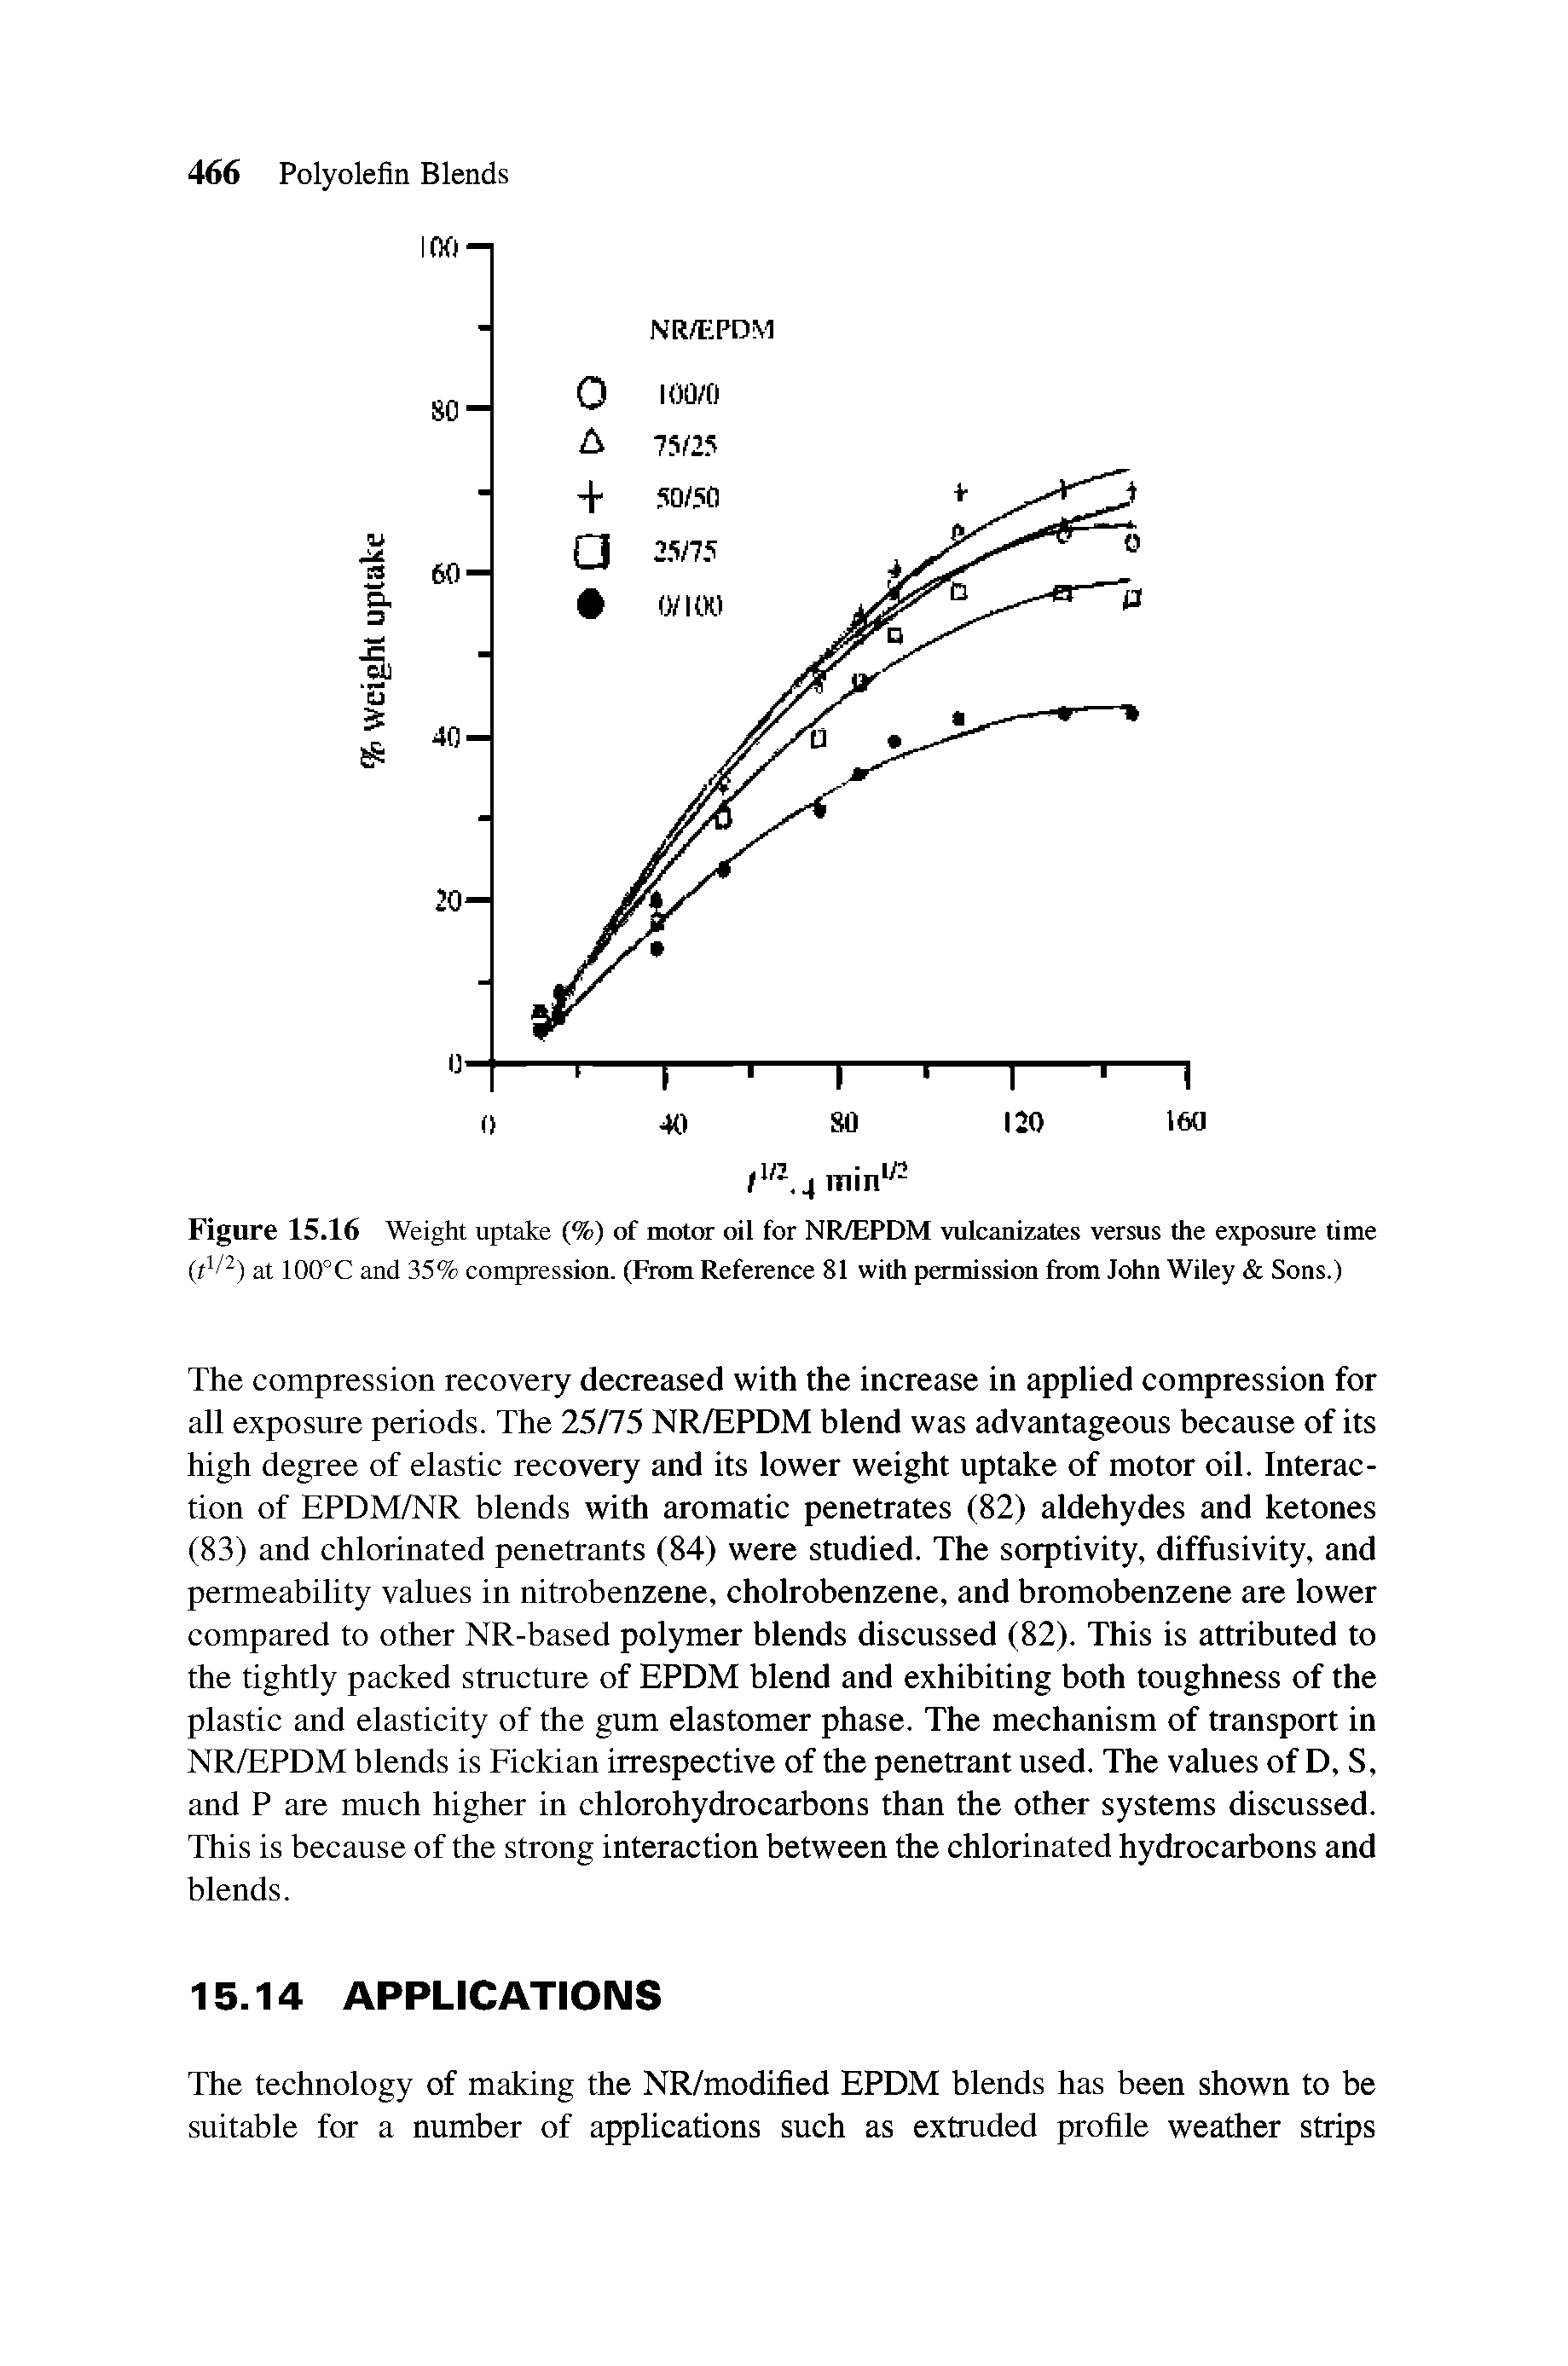 Figure 15.16 Weight uptake (%) of motor oil for NR/EPDM vulcanizates versus the exposure time at 100°C and 35% compression. (From Reference 81 with permission from John Wiley Sons.)...